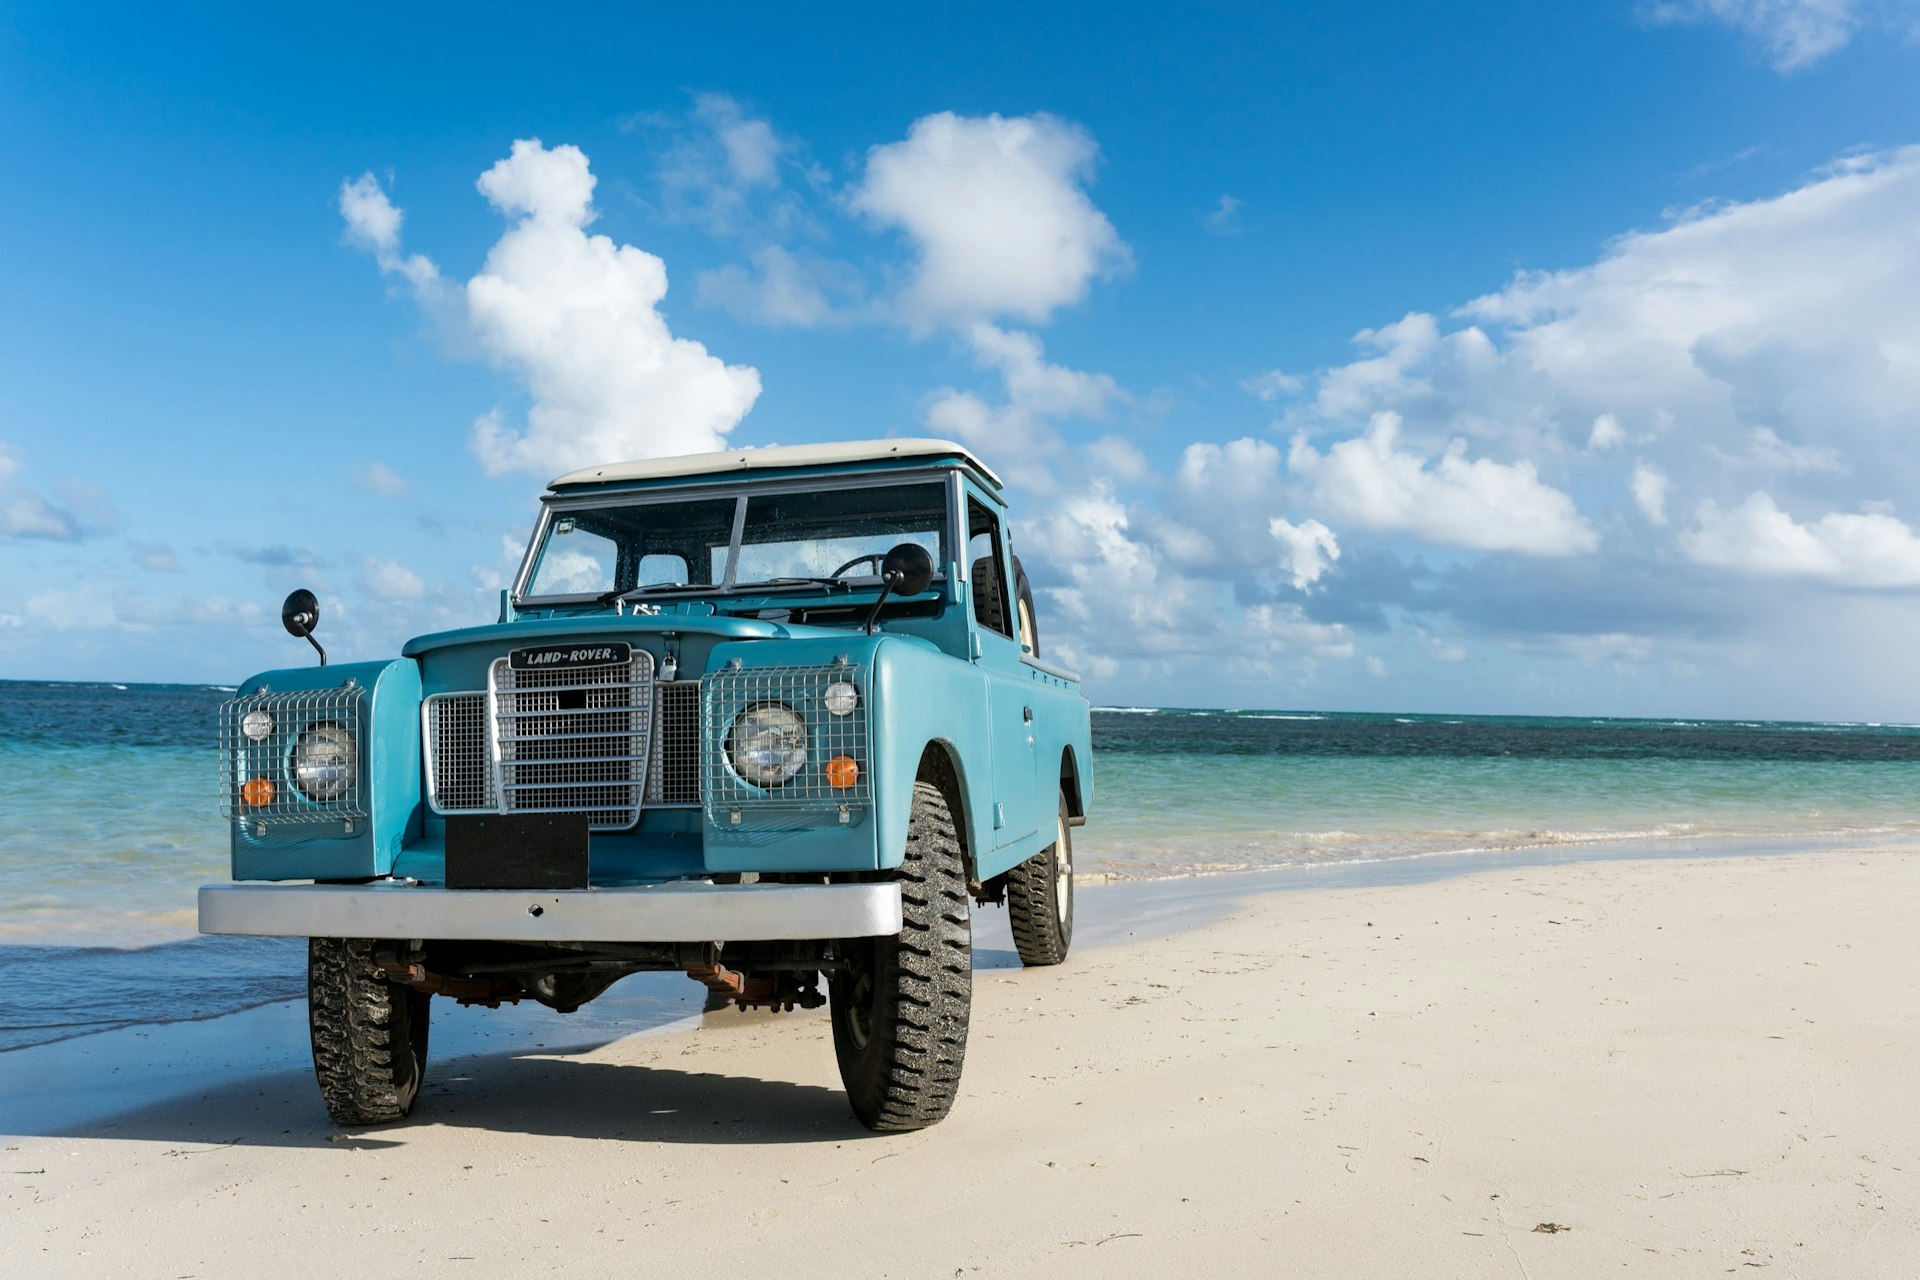 An old blue rover is parked on a beach near the water in Las Terranes, Dominican Republic.